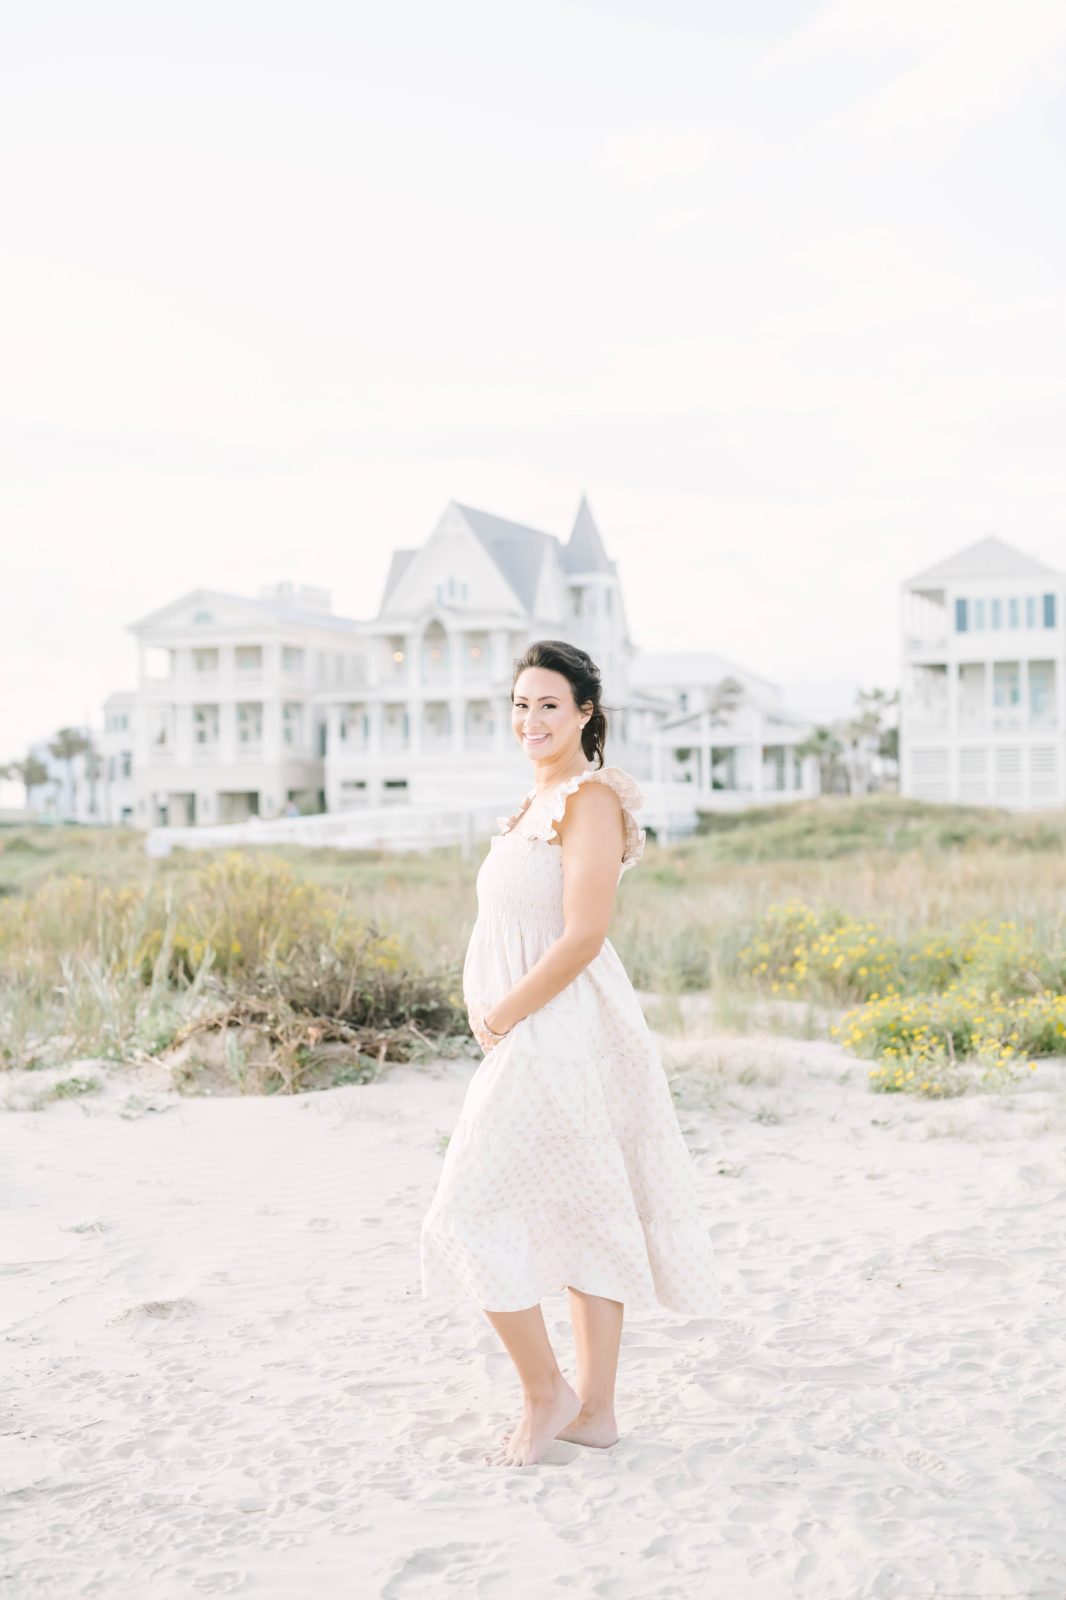 Bright airy maternity portrait of a woman on a summer day in sundress by Christina Elliott Photography. bright airy photographers Texas #ChristinaElliottPhotography #ChristinaElliottMaternity #Galvestonmaternityphotographers #maternityportraits